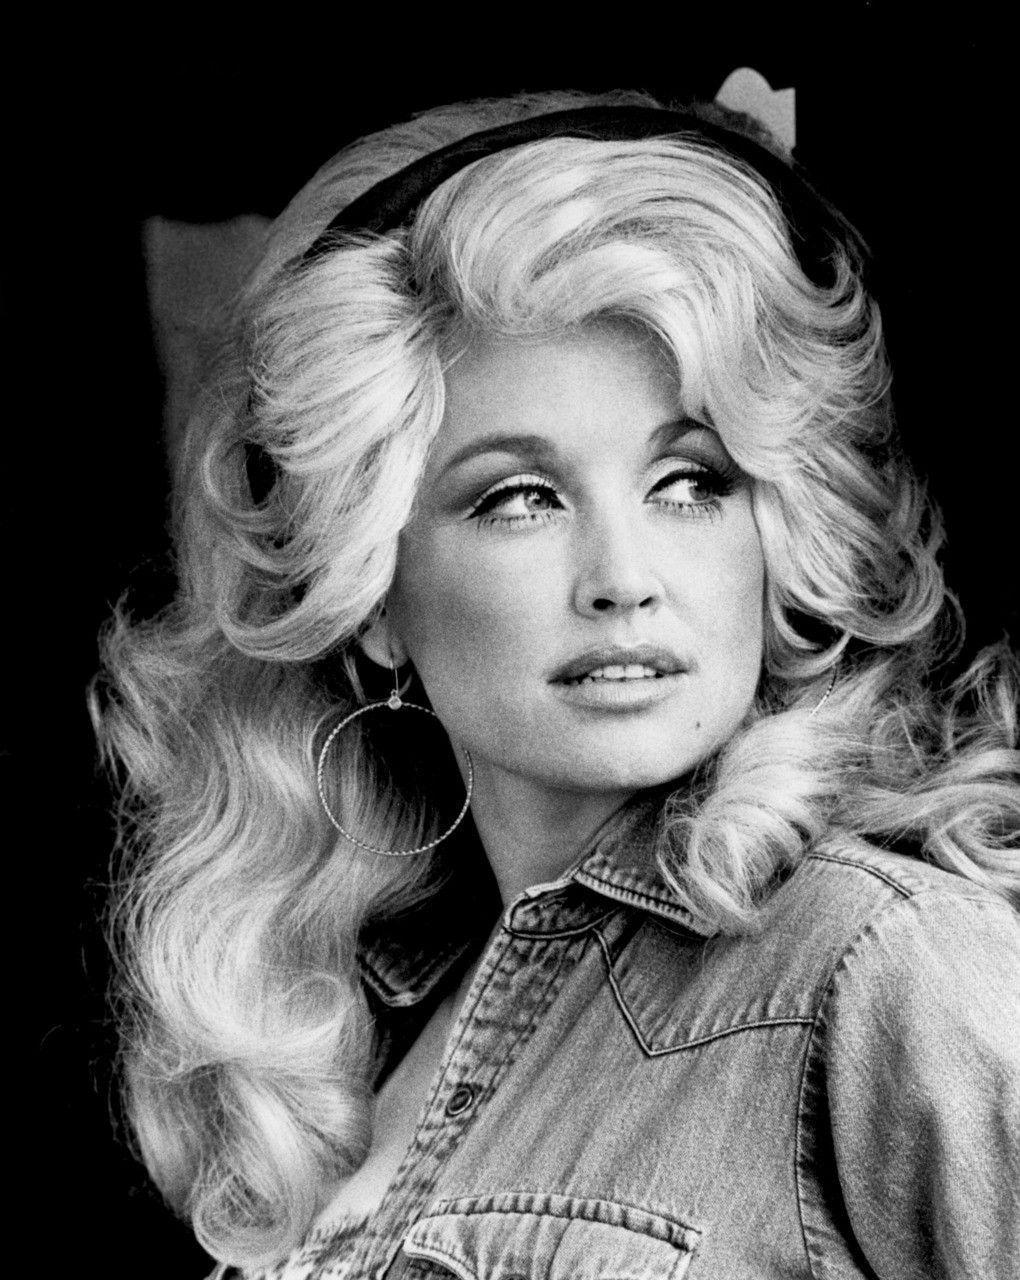 Dolly Parton Wallpapers - Top Free Dolly Parton Backgrounds -  WallpaperAccess